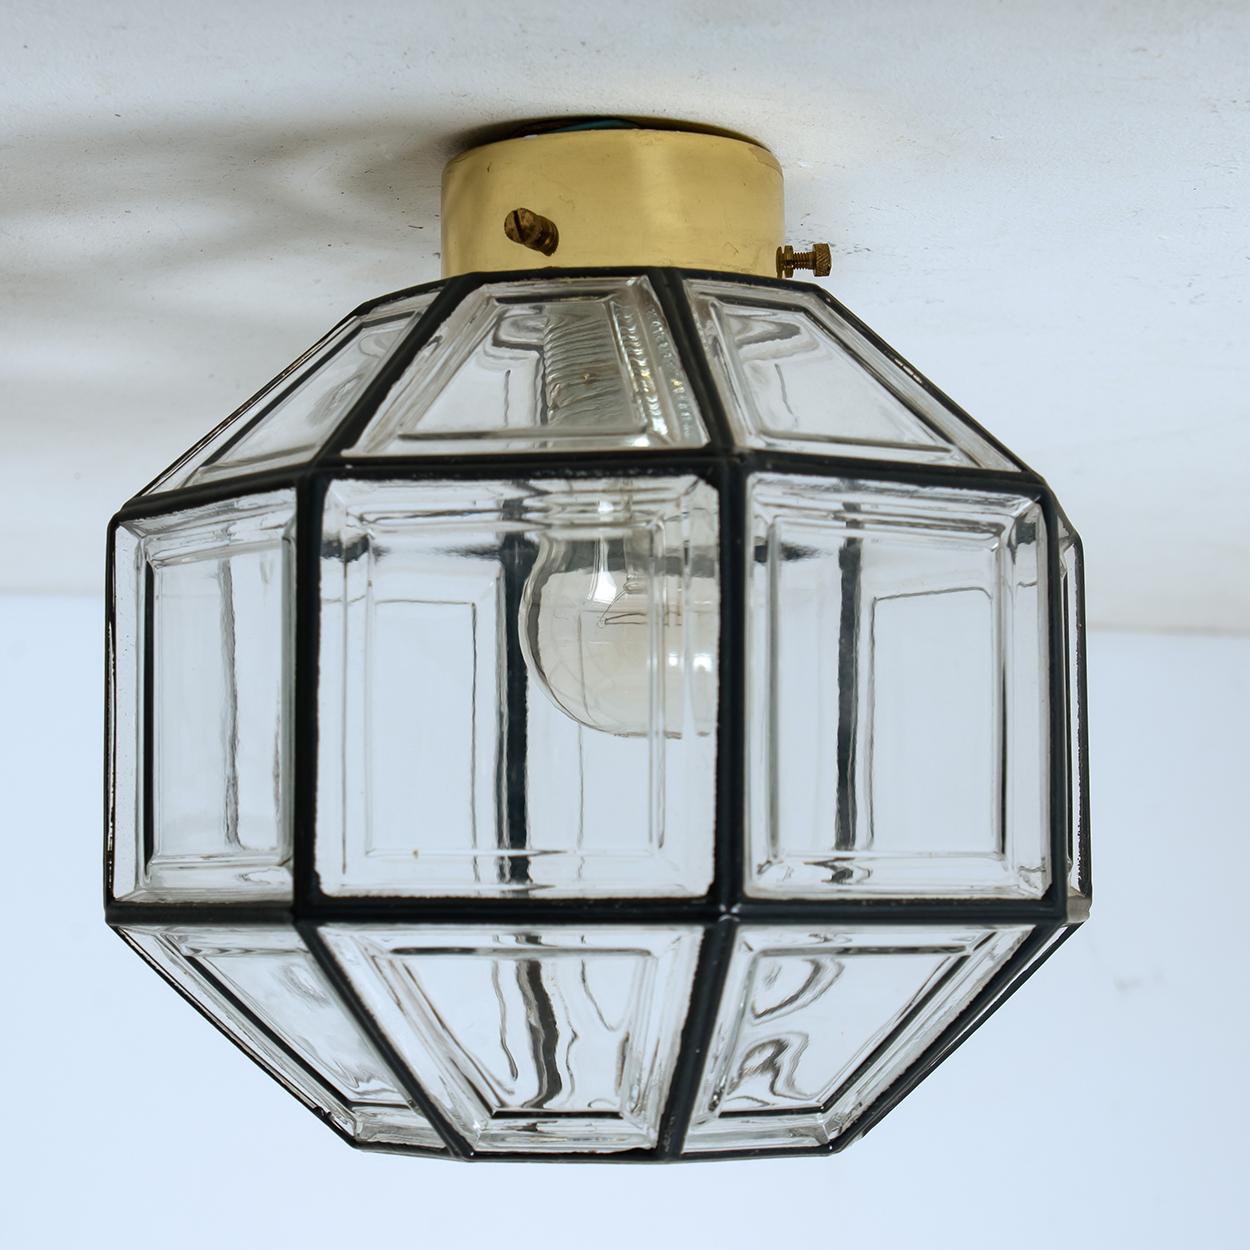 A beautiful set of octagonal glass light flush mounts or wall lights, manufactured by Glasshütte Limburg in Germany during the 1970s. Beautiful craftsmanship. Illuminates beautifully. They come from an old grand hotel in Germany.

Please note the